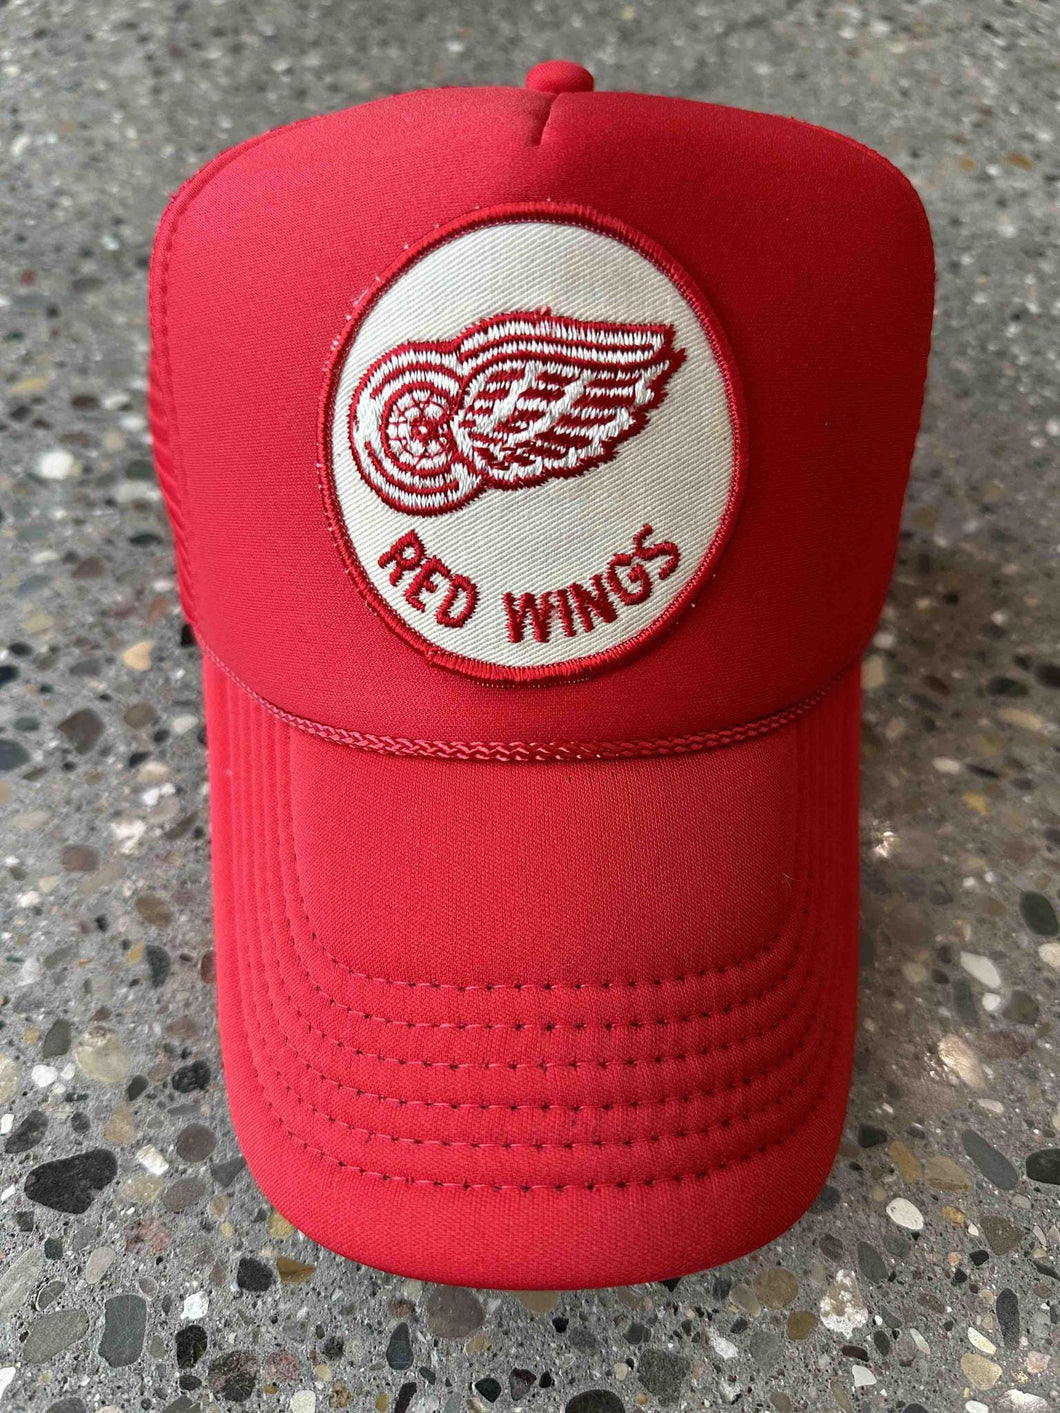 ABC Vintage Detroit Red Wings Vintage Round Patch Trucker Hat (Red) ABC Vintage 